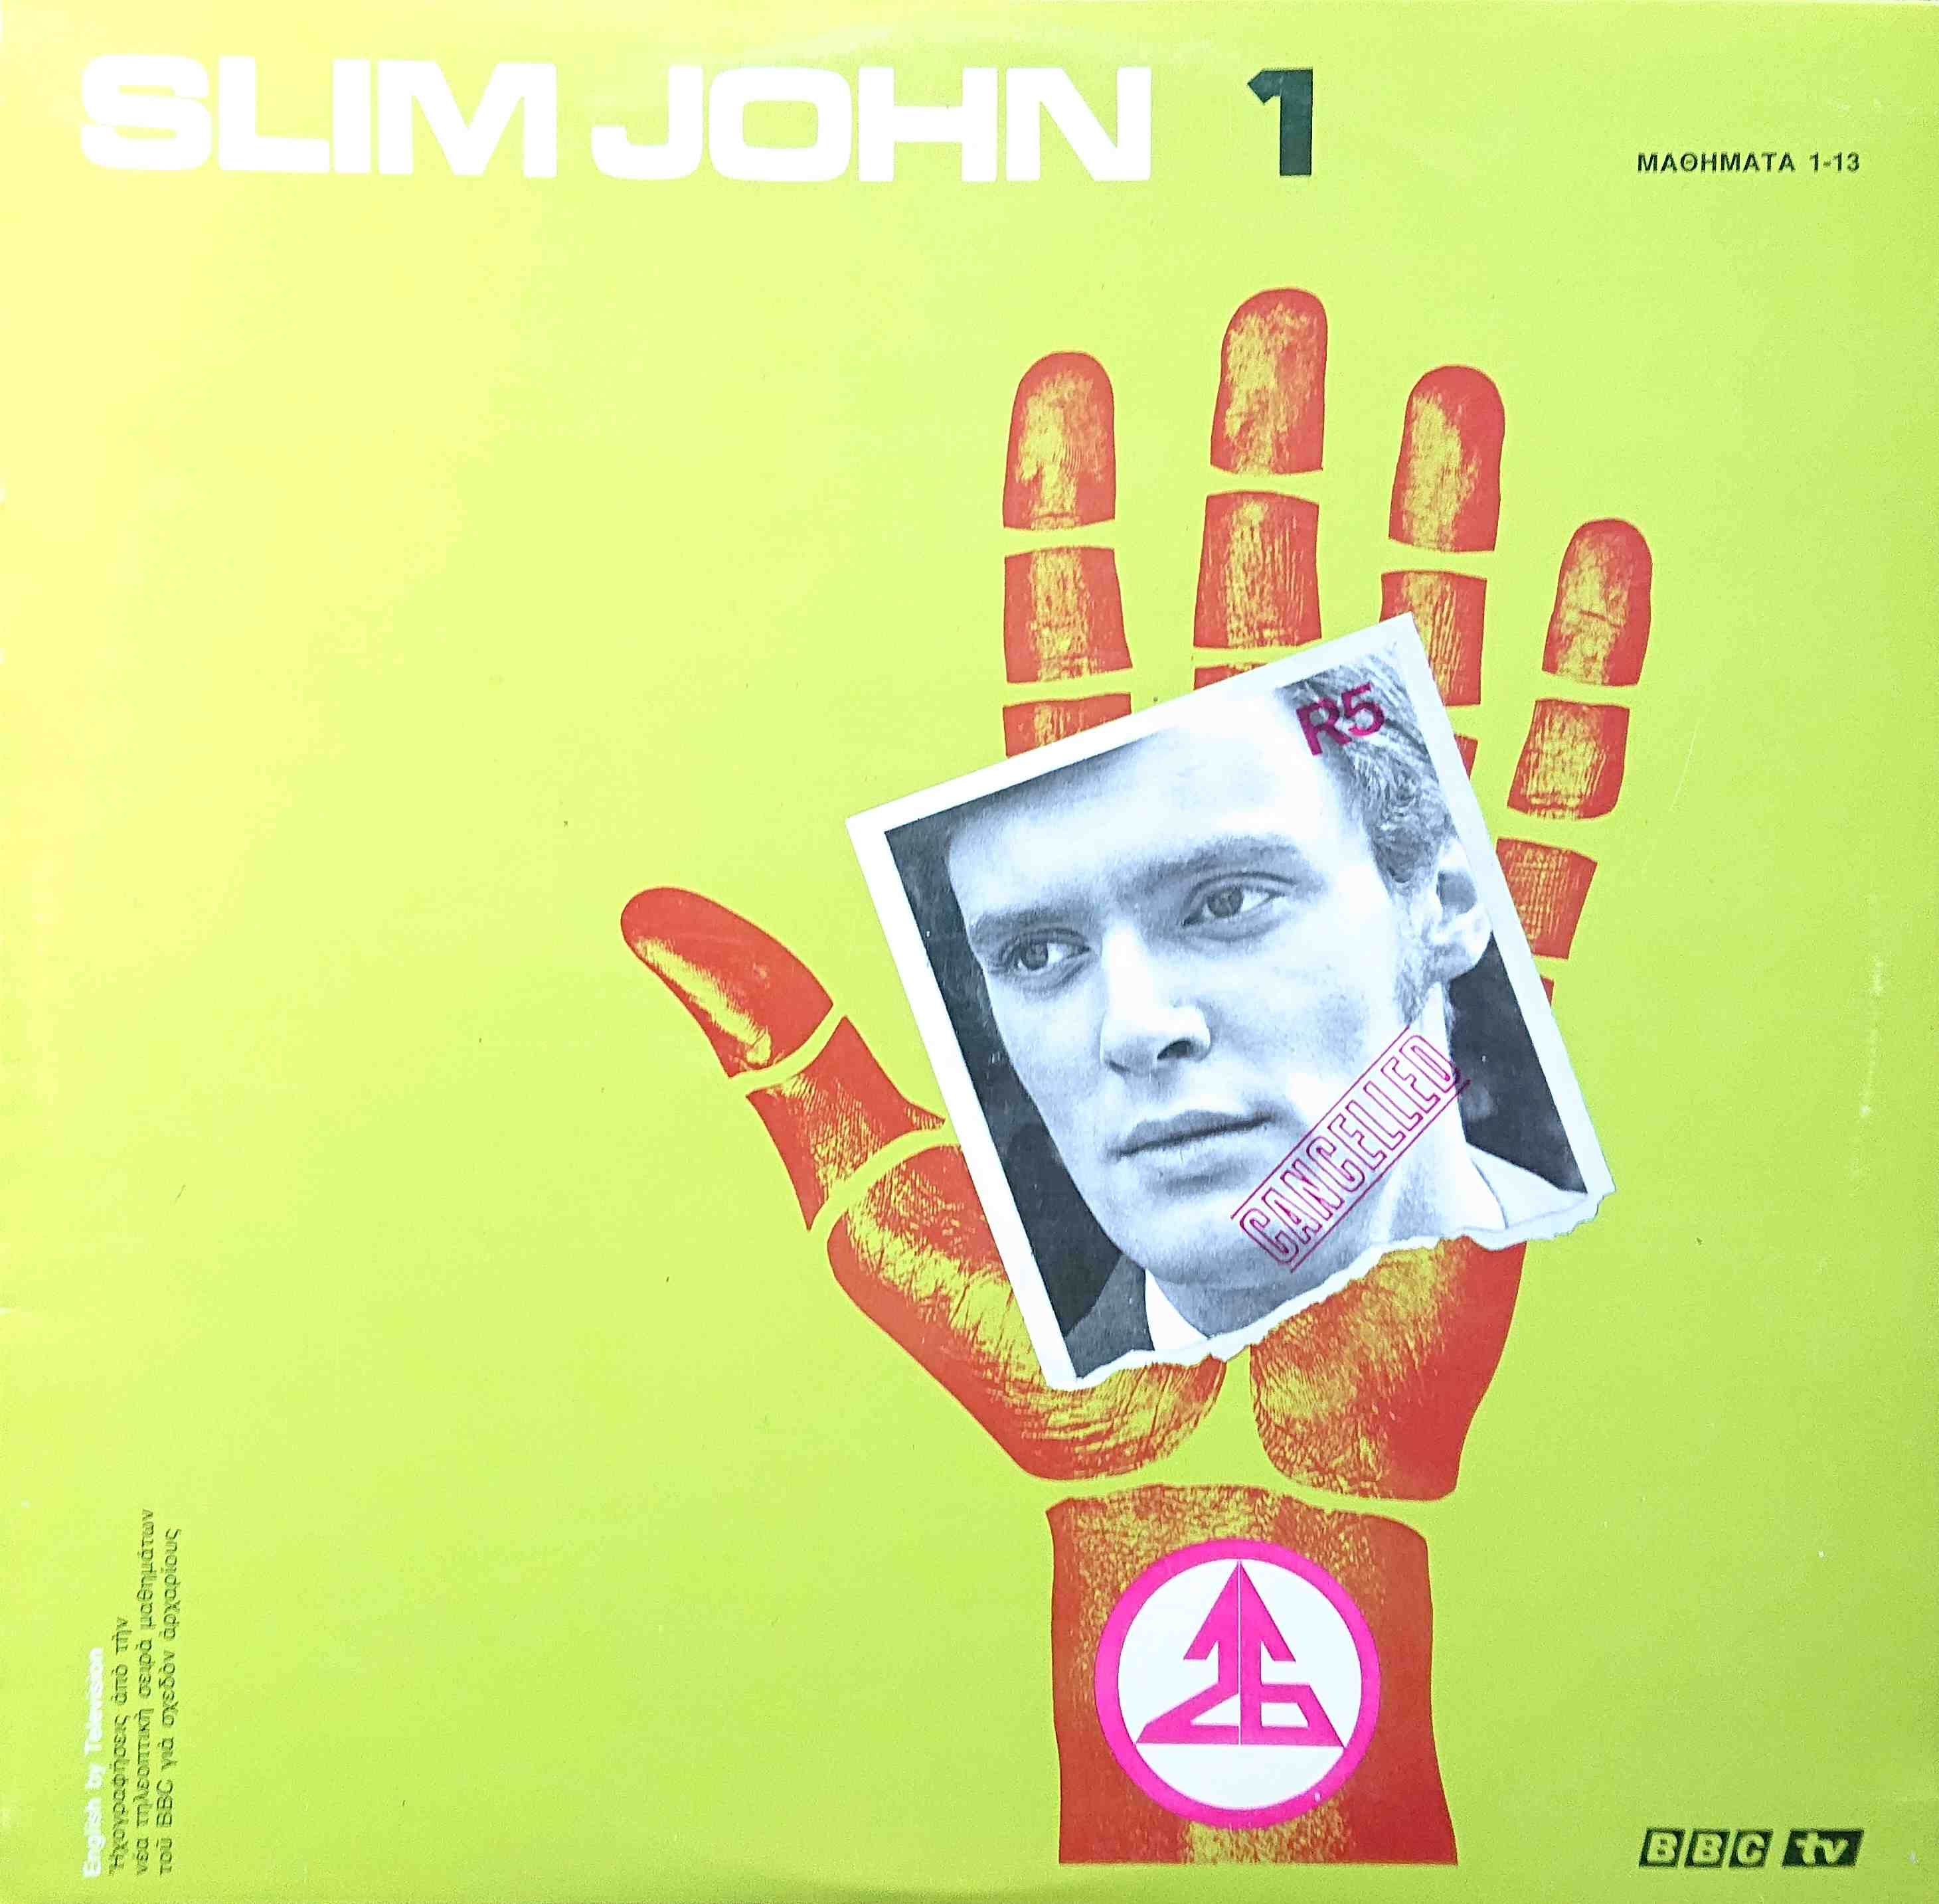 Picture of SJ 1 Slim John 1 by artist Unknown from the BBC albums - Records and Tapes library